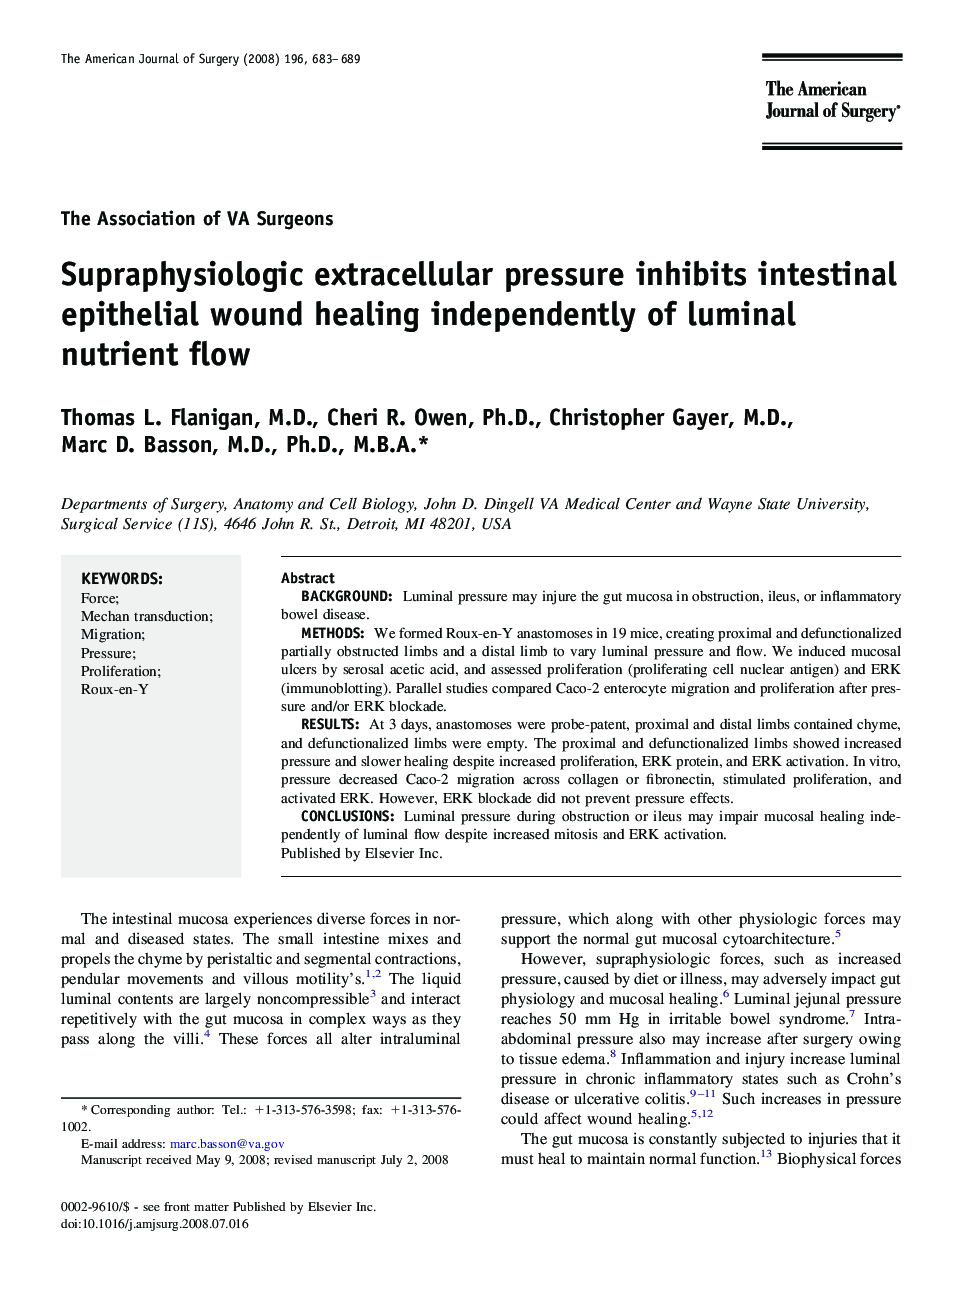 Supraphysiologic extracellular pressure inhibits intestinal epithelial wound healing independently of luminal nutrient flow